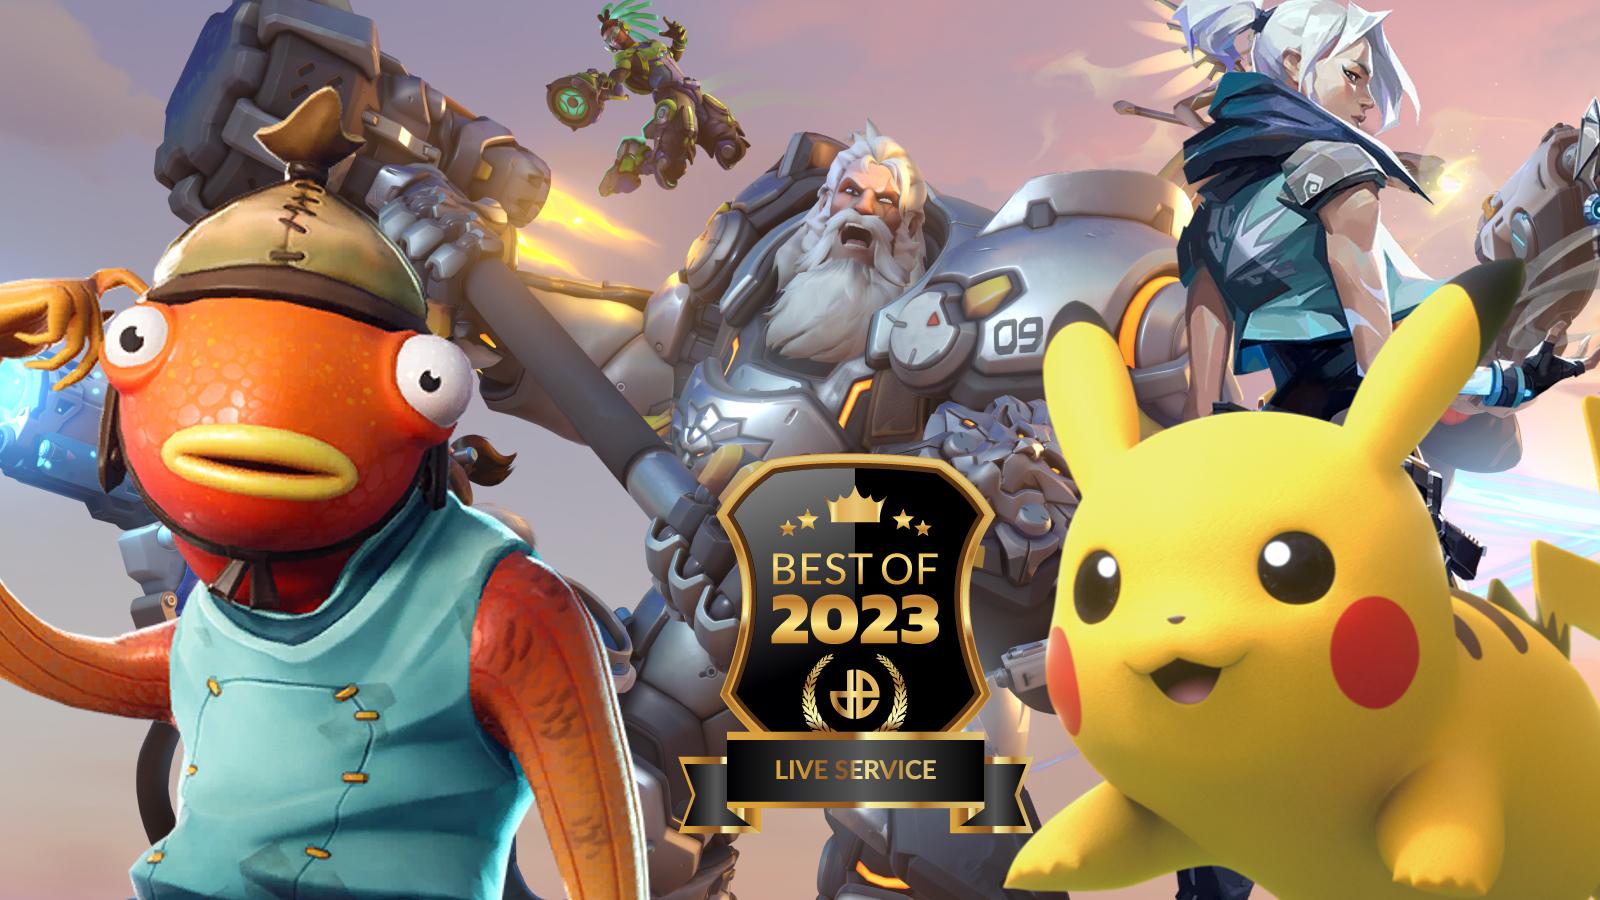 Reinahardt, fortnite fish, Jett and Pikachu in Dexerto Best Live Service game feature image